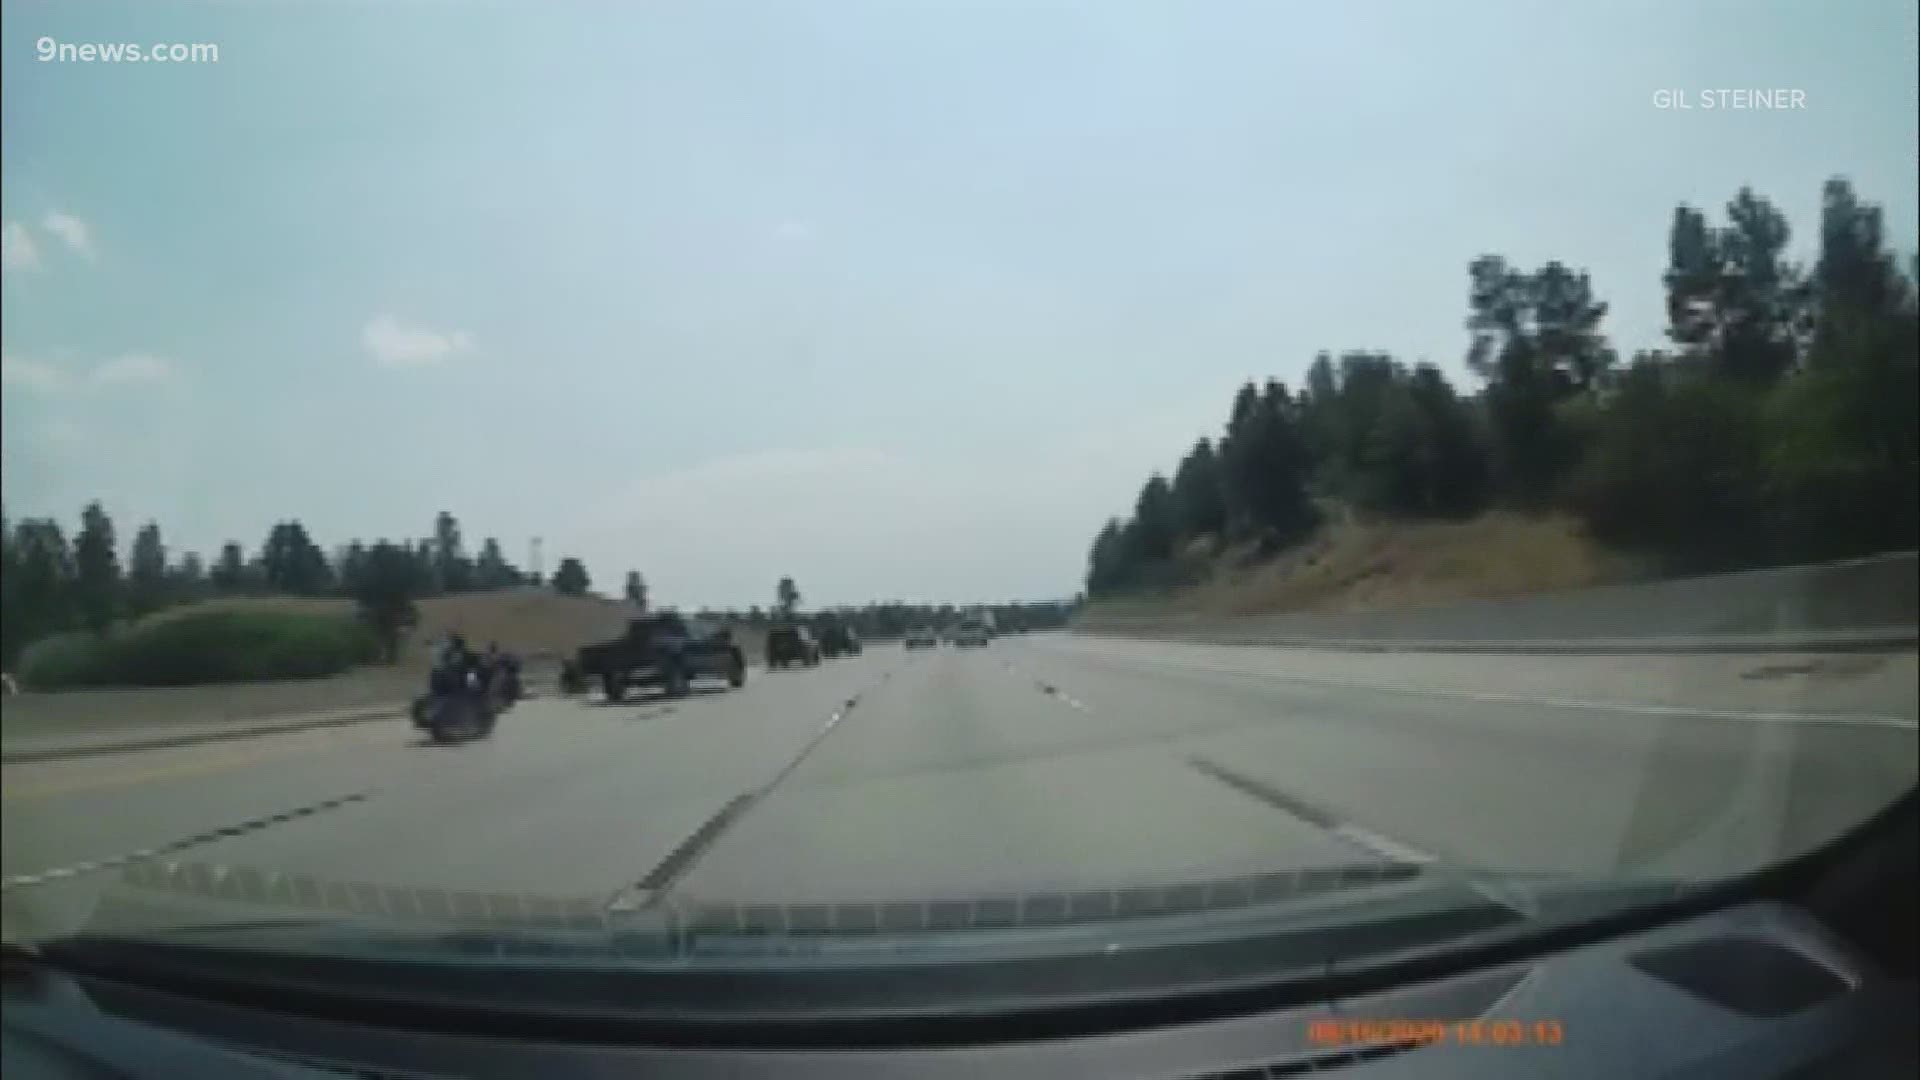 The man on the motorcycle is 54-year-old Quentin Quidley. Passing through Colorado on a bike trip with his brother and two of their friends. Today, he is in the ICU.